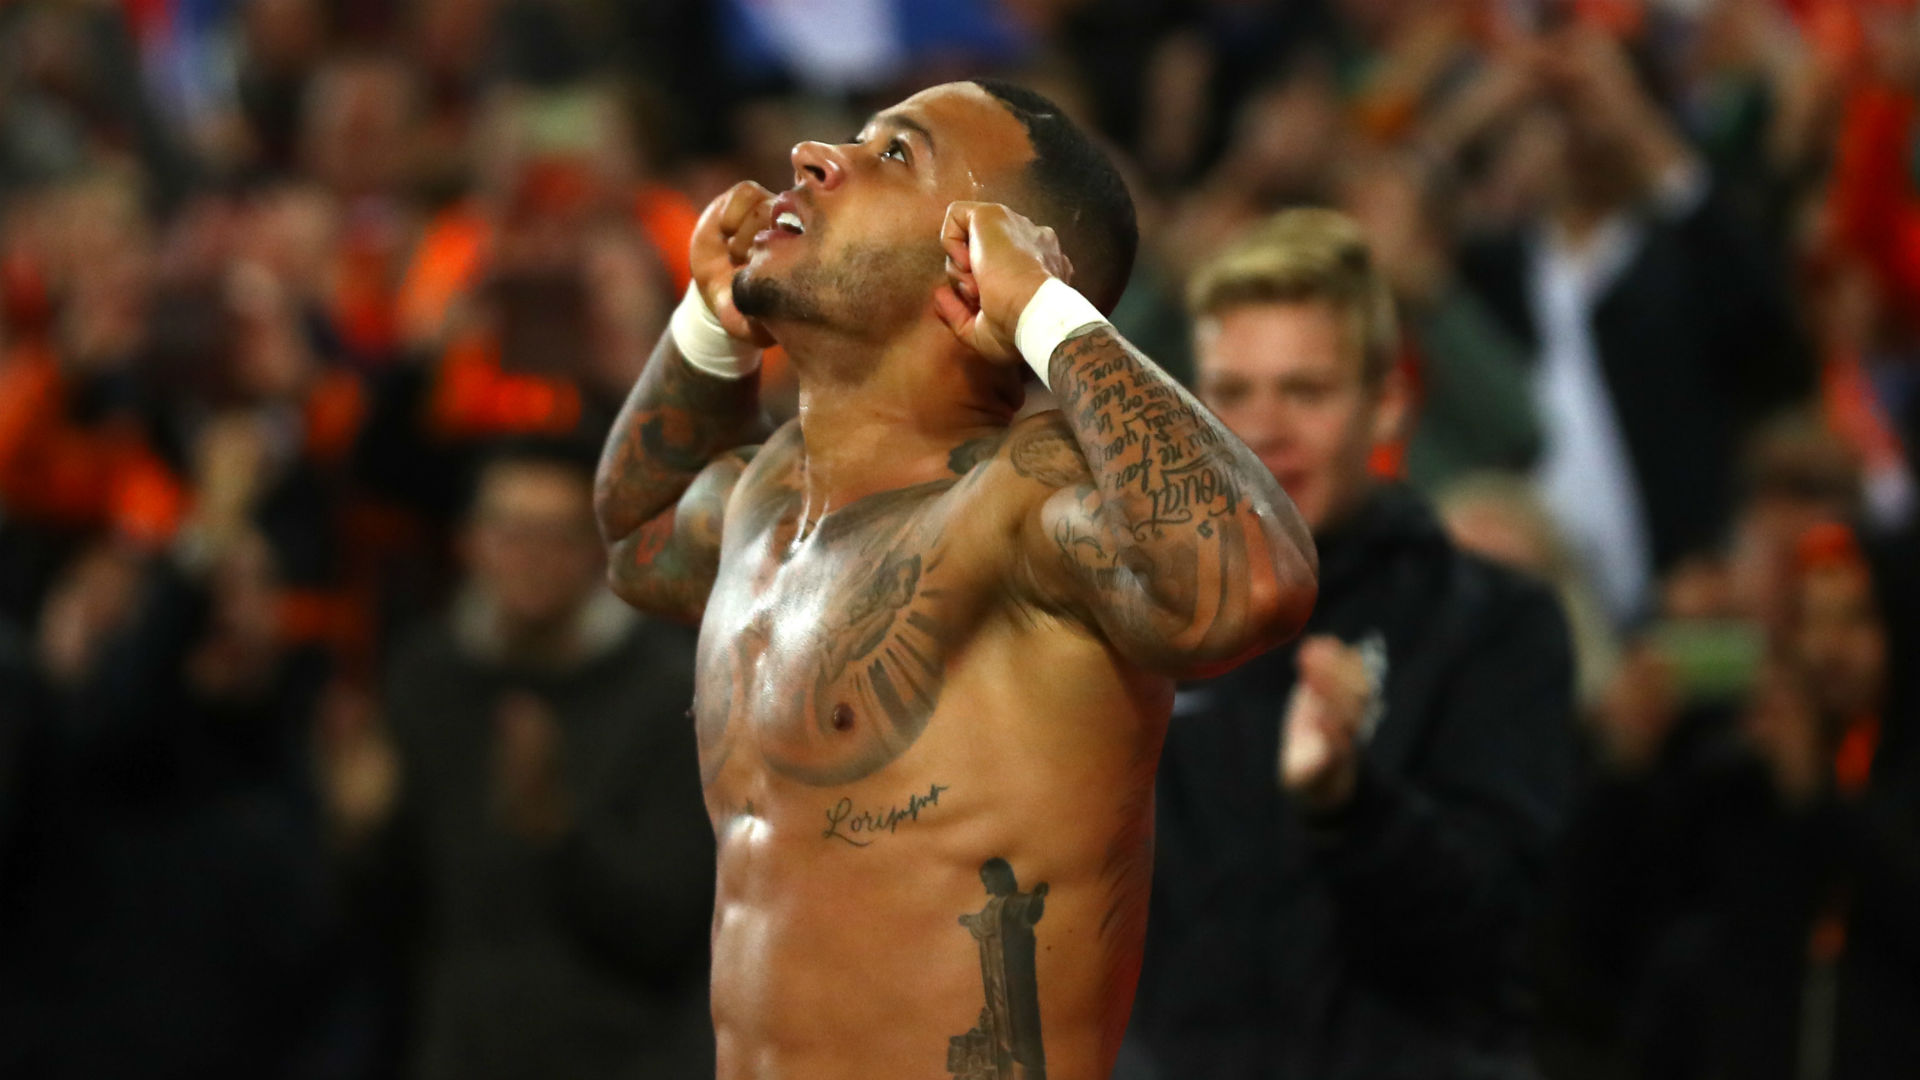 Netherlands 3-1 Northern Ireland: De Jong and Depay spare Oranje's blushes